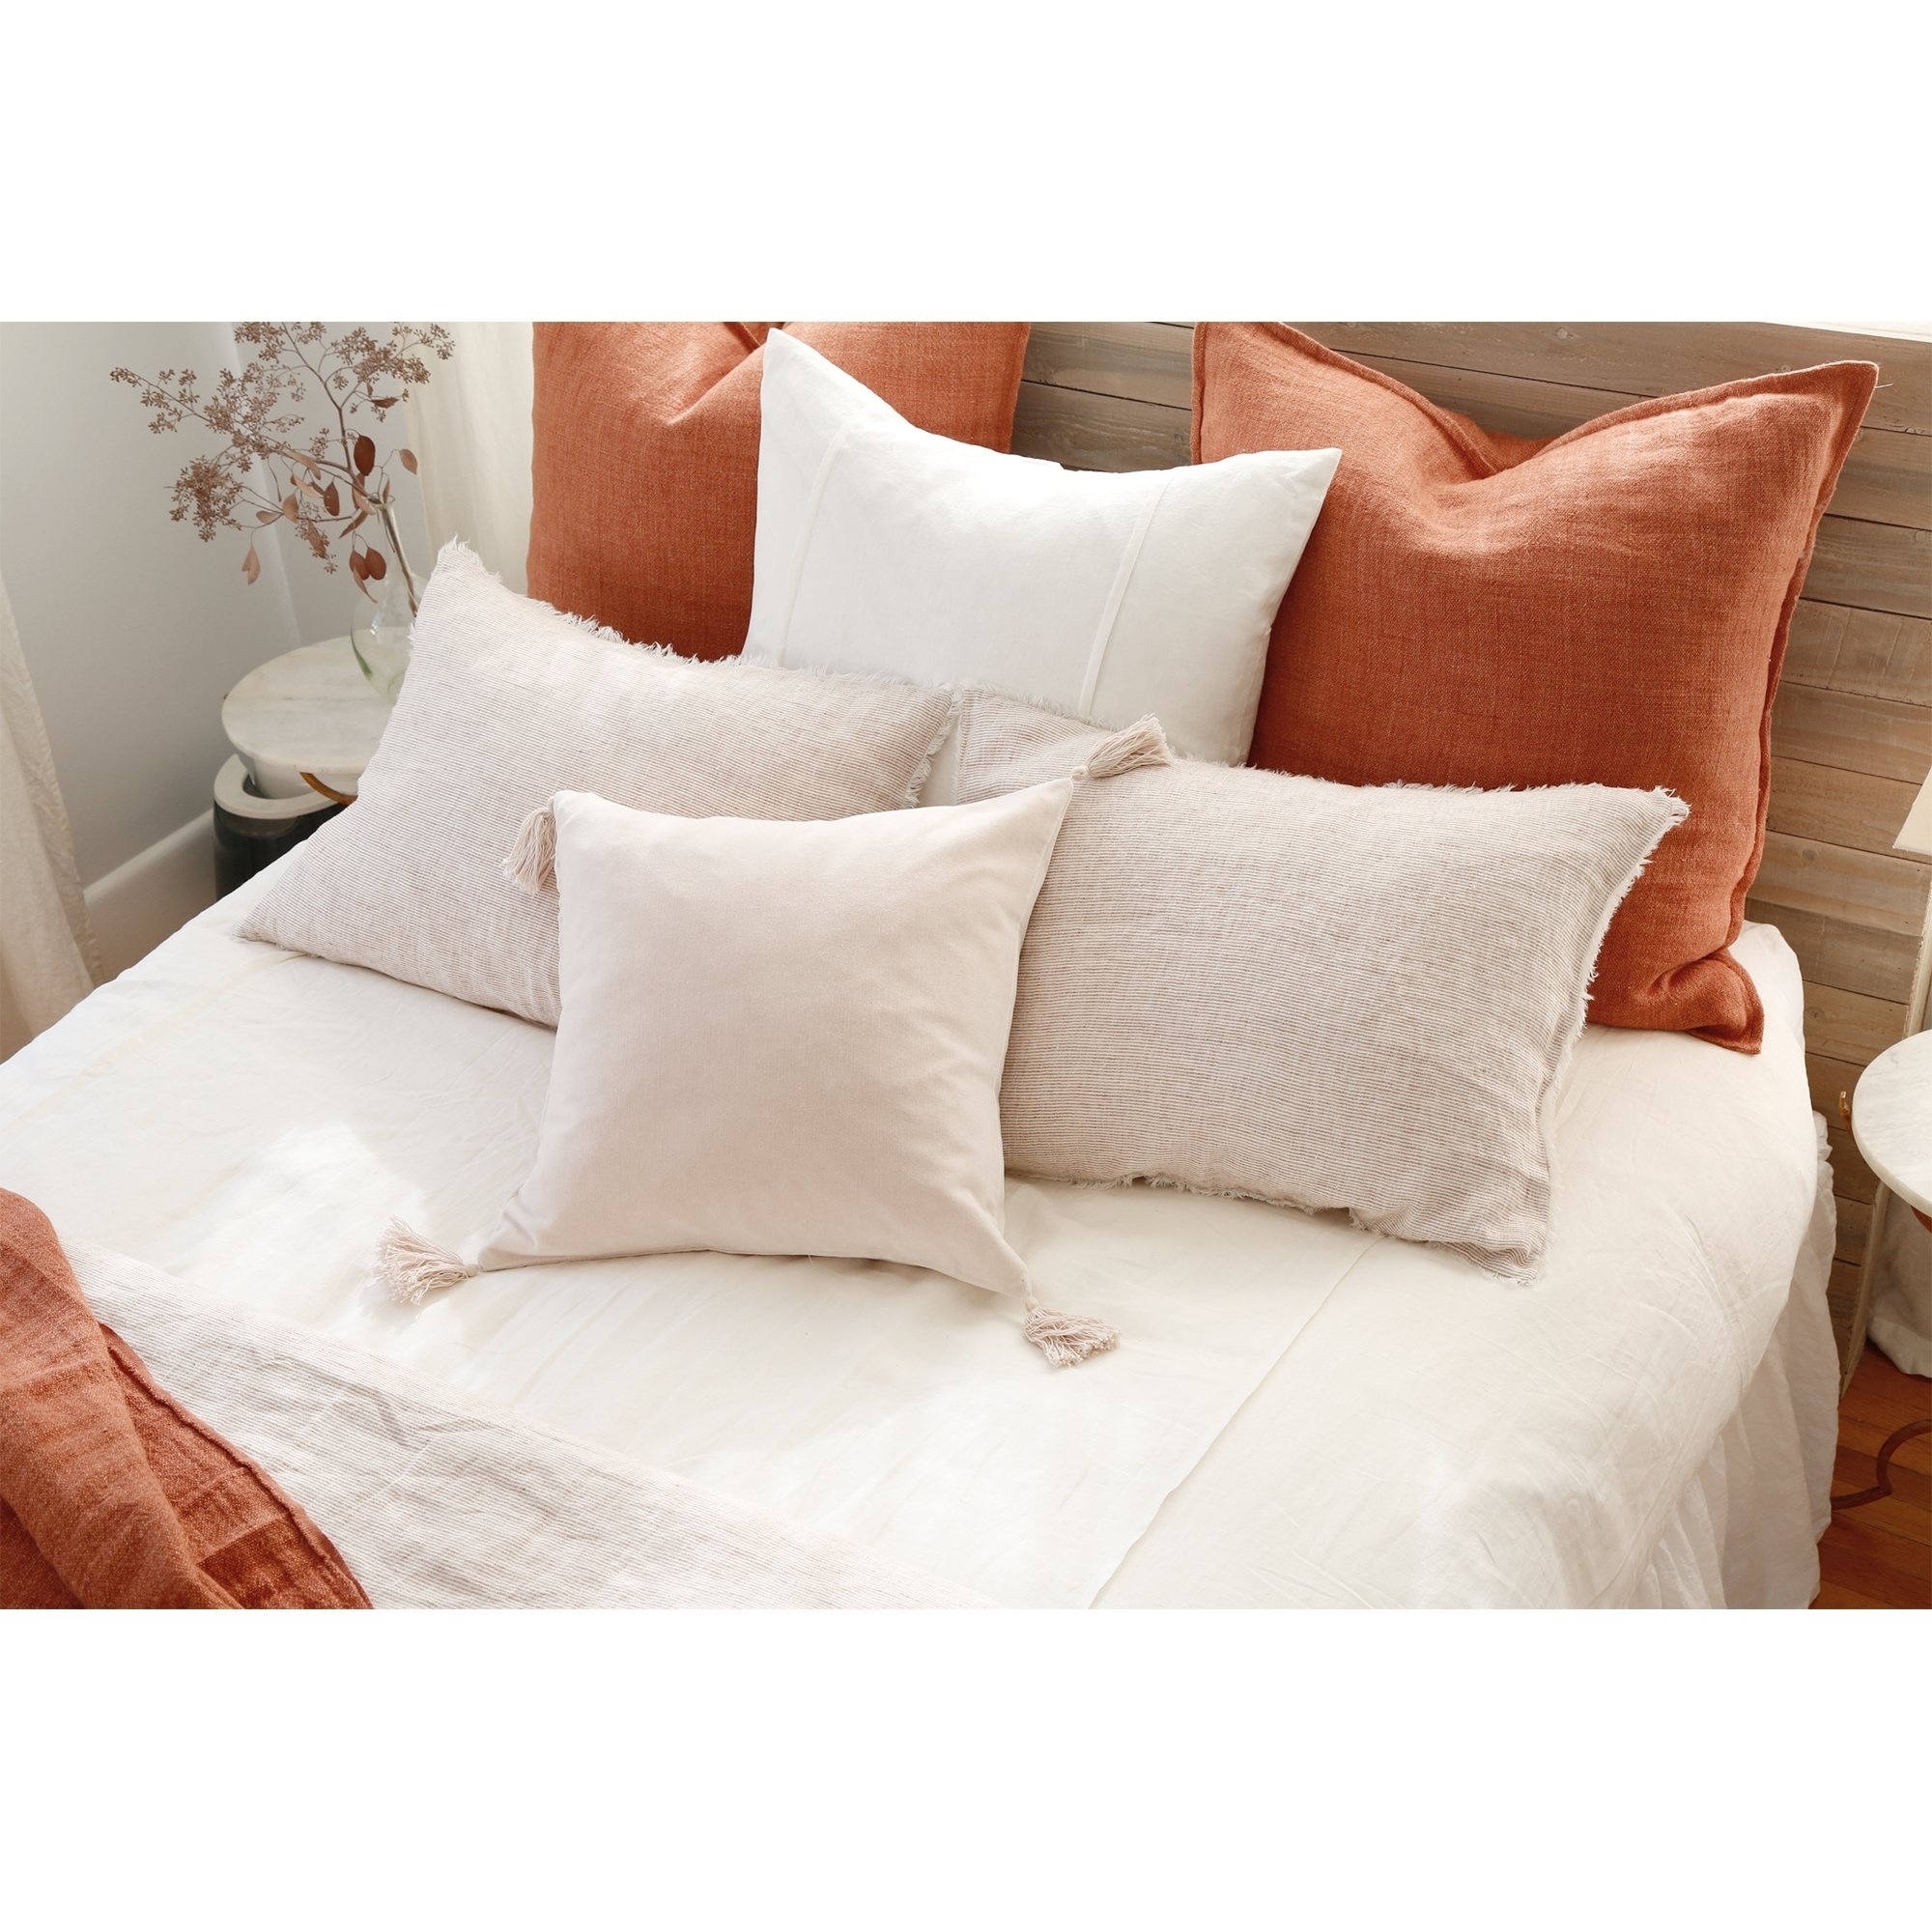 Montauk 28" x 36" Oversized Pillow, Terracotta by Pom Pom at Home - Image 1